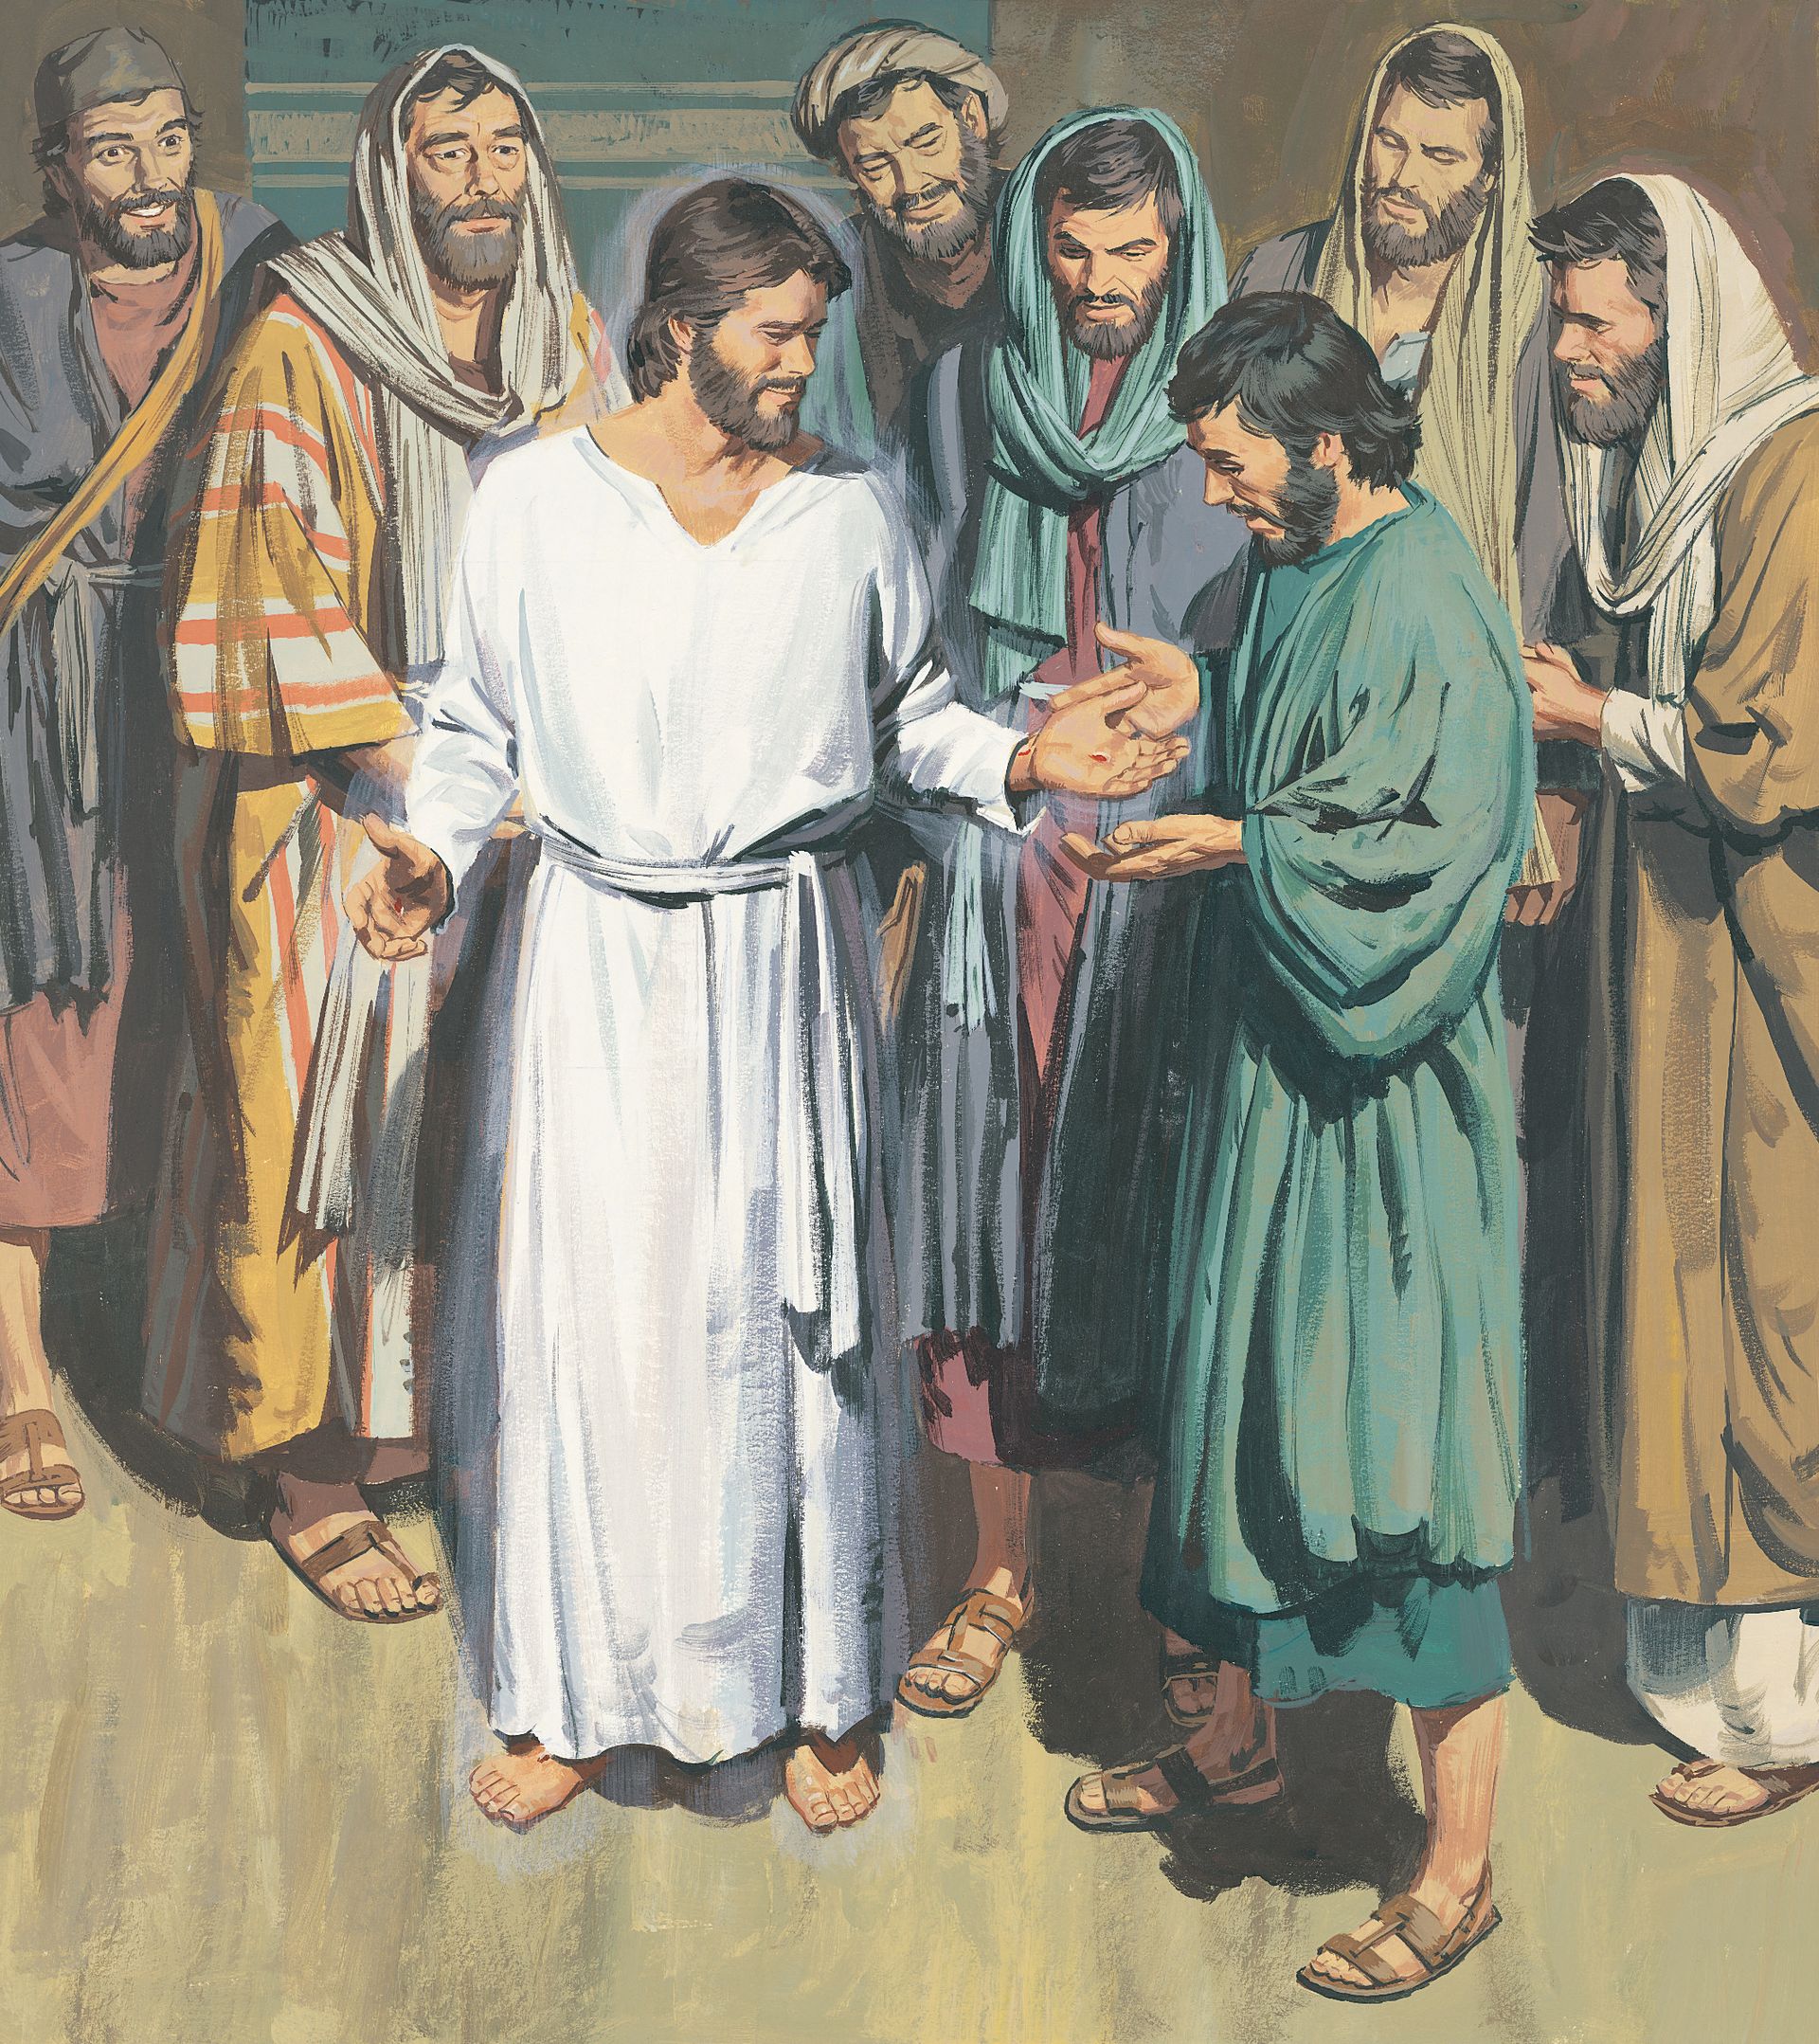 An illustration by Paul Mann depicting the resurrected Christ appearing to His Apostles.